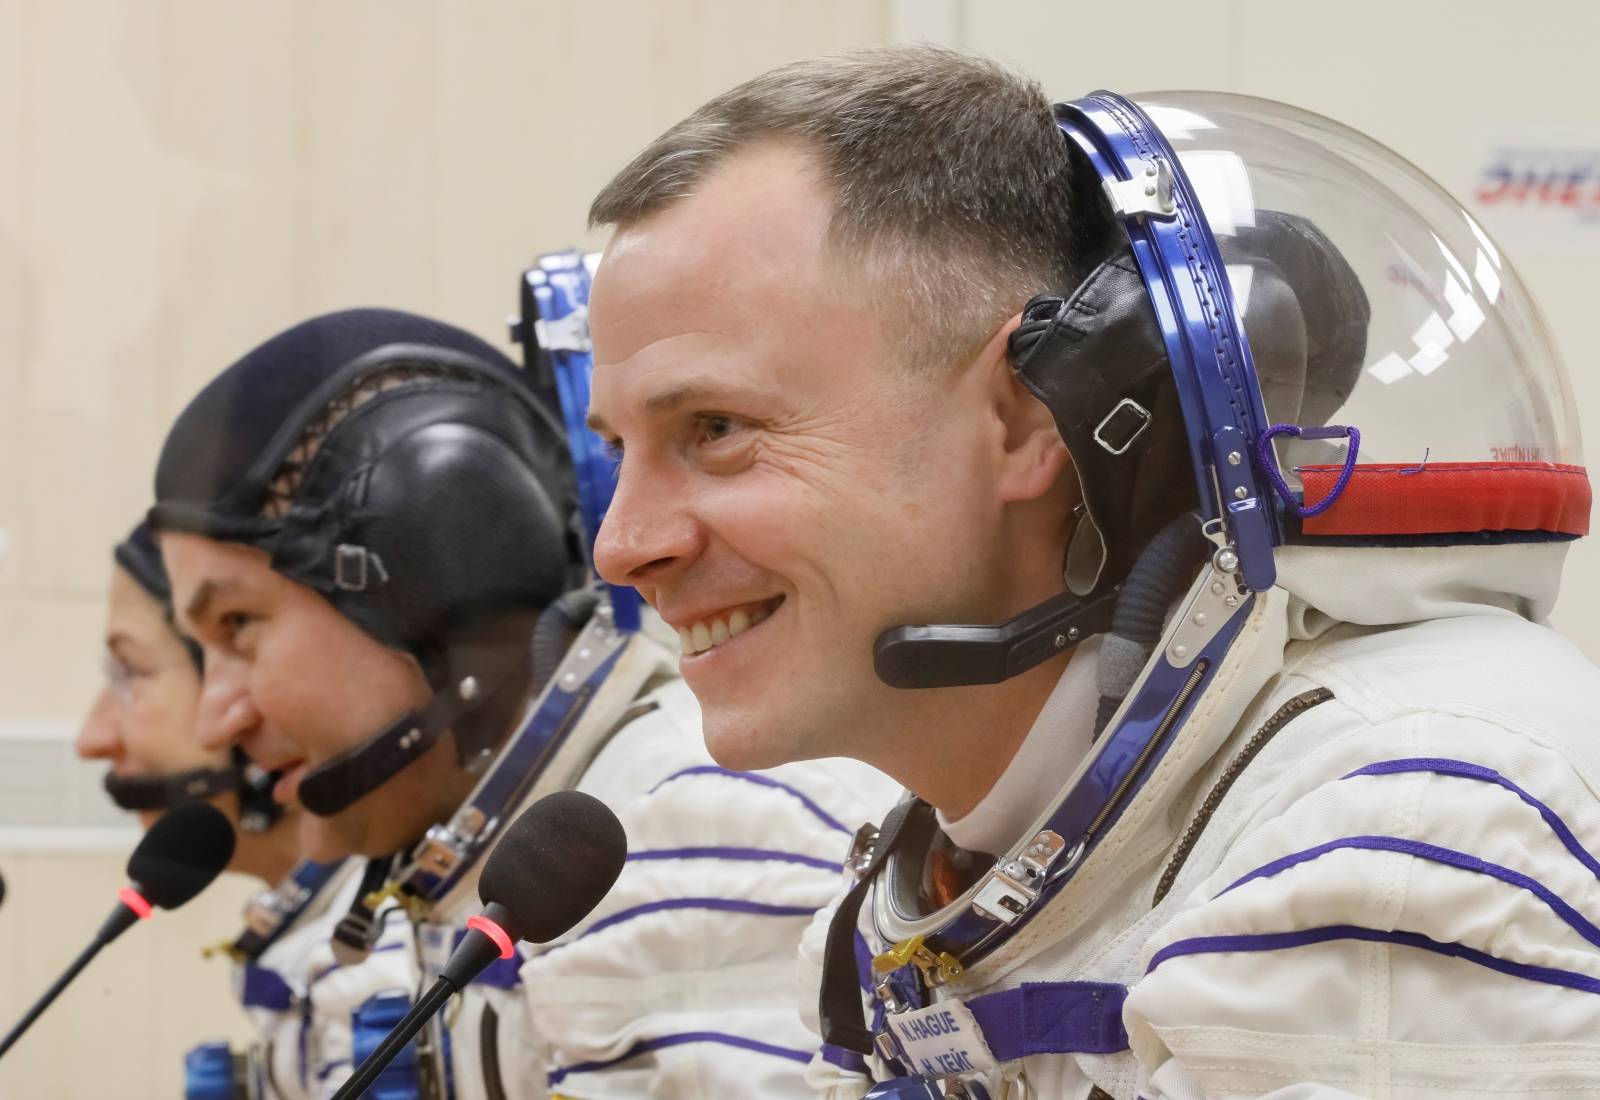 The International Space Station (ISS) crew members talk after donning space suits shortly before their launch at the Baikonur Cosmodrome